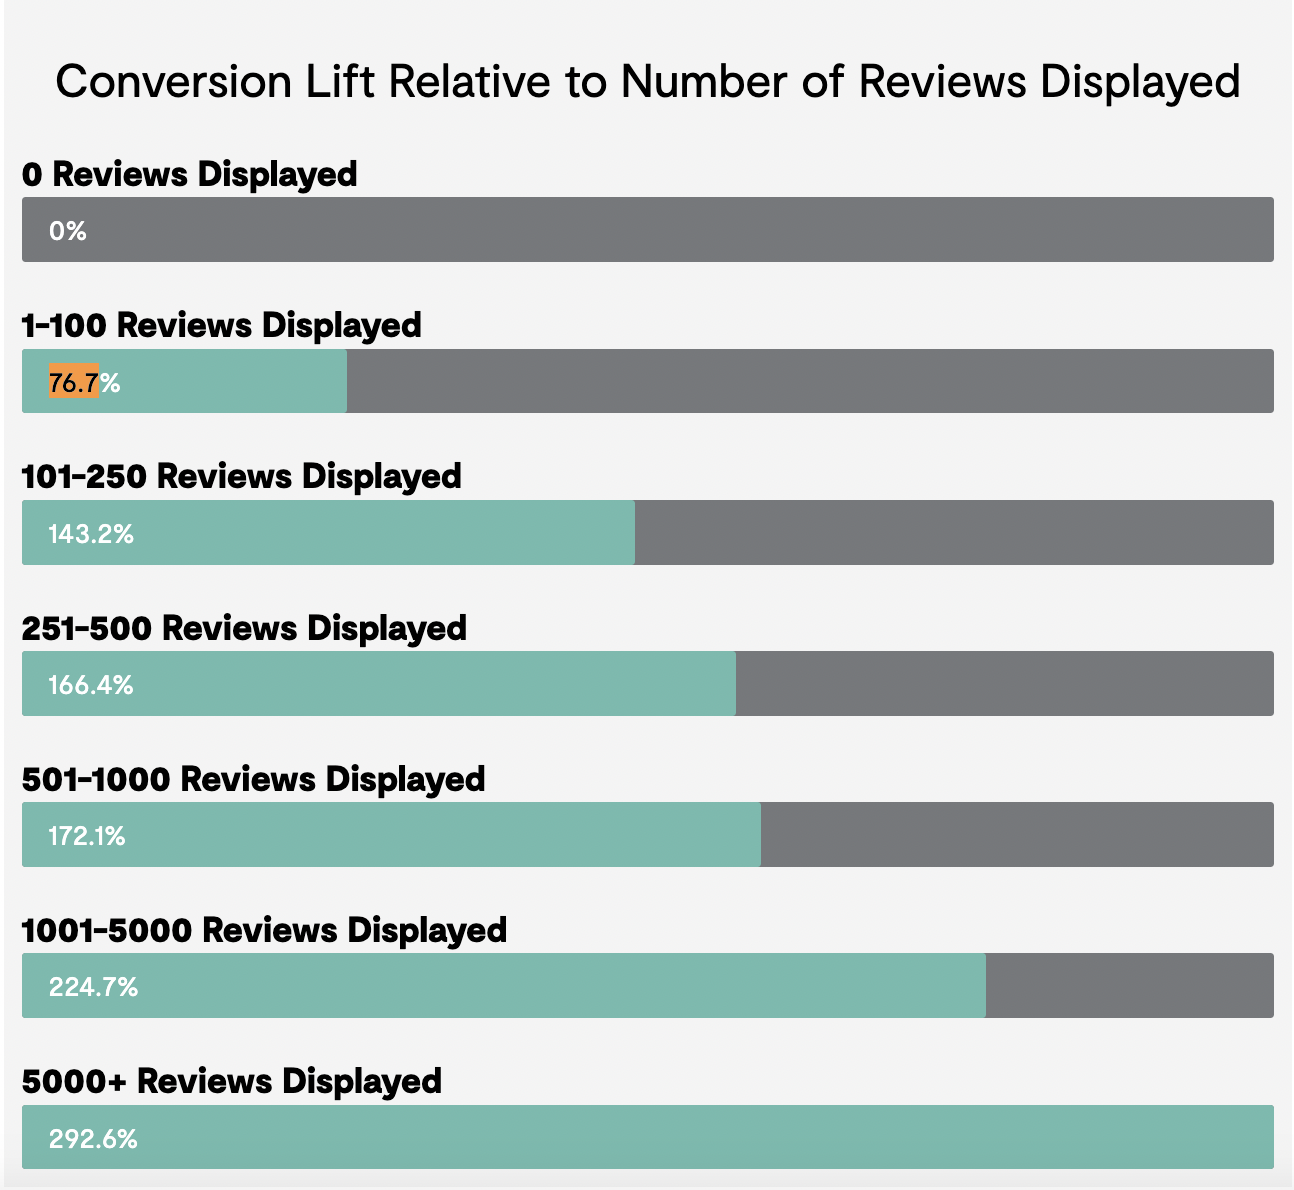 Conversion lift relative to number of reviews displayed